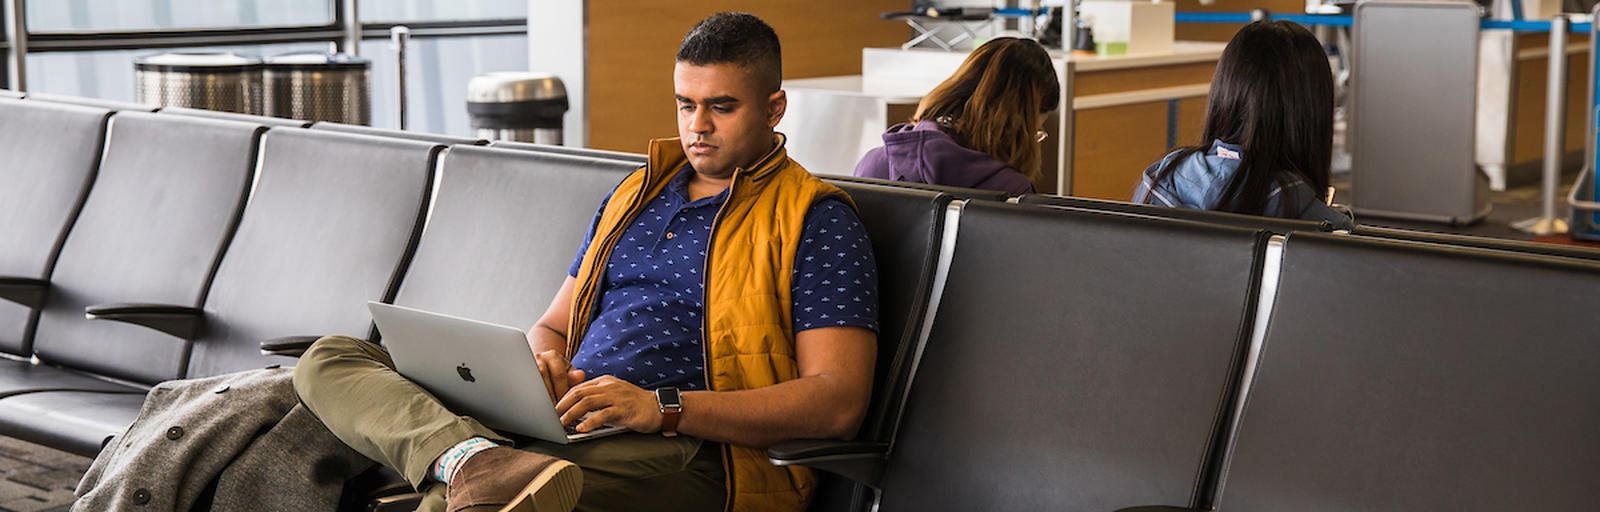 Man on computer in airport